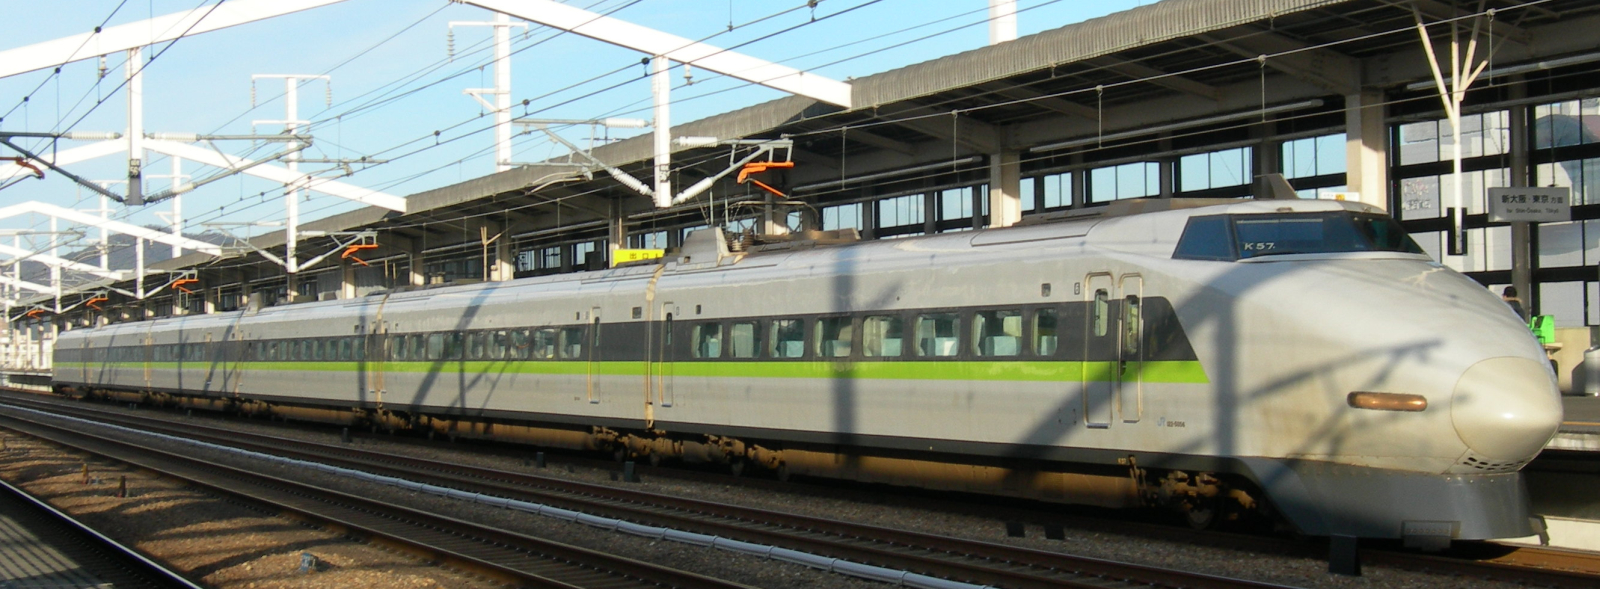 Six car K set in JR West livery in January 2008